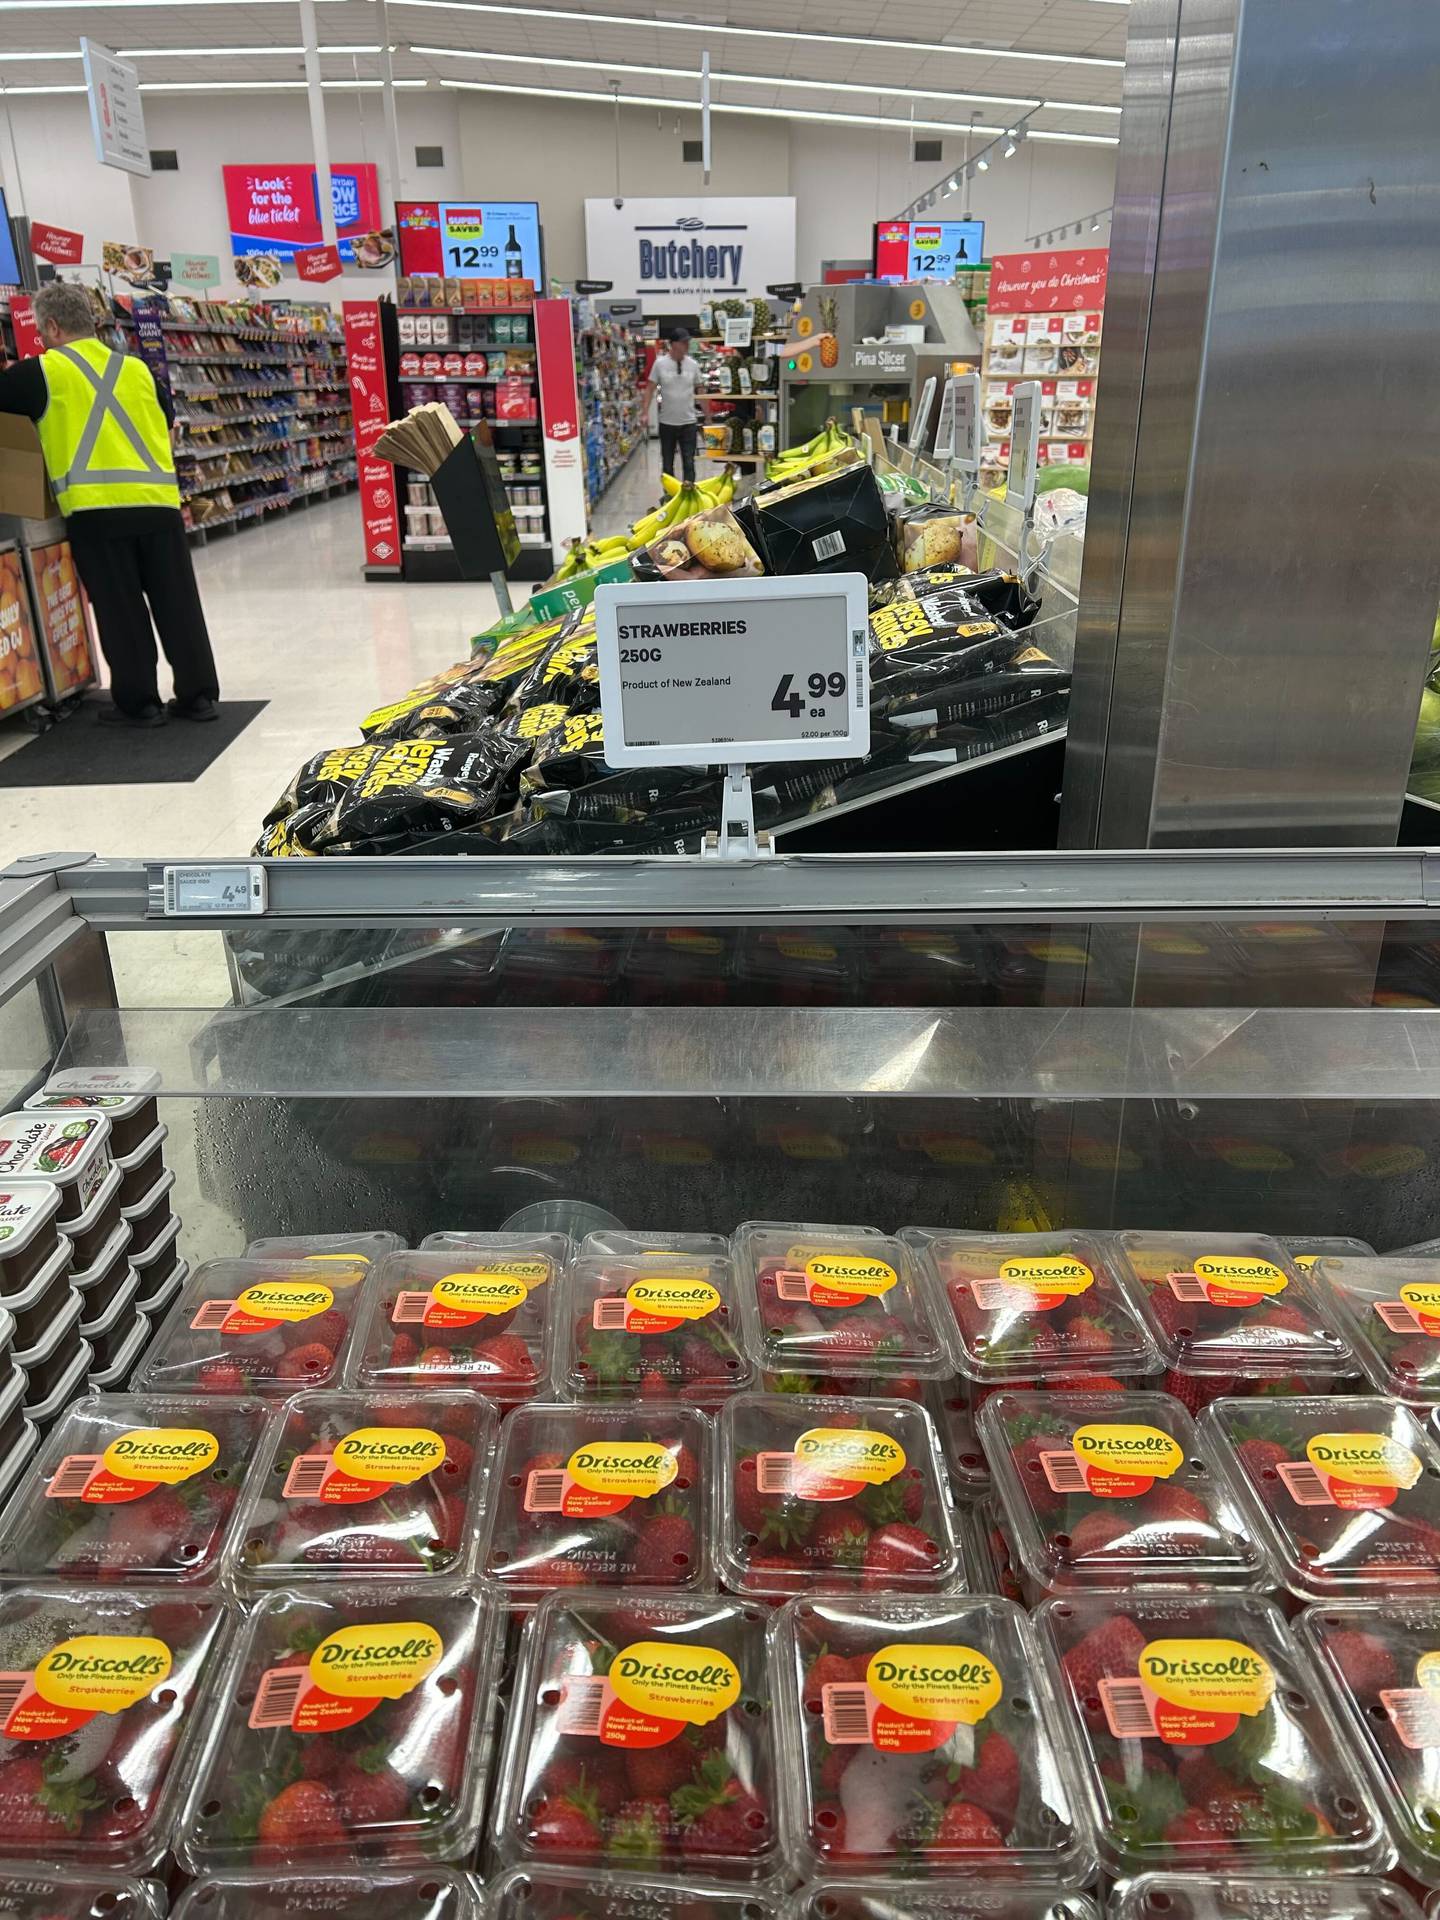 Strawberries on sale for $5 a 250g punnet at New World. Photo / NZ Herald